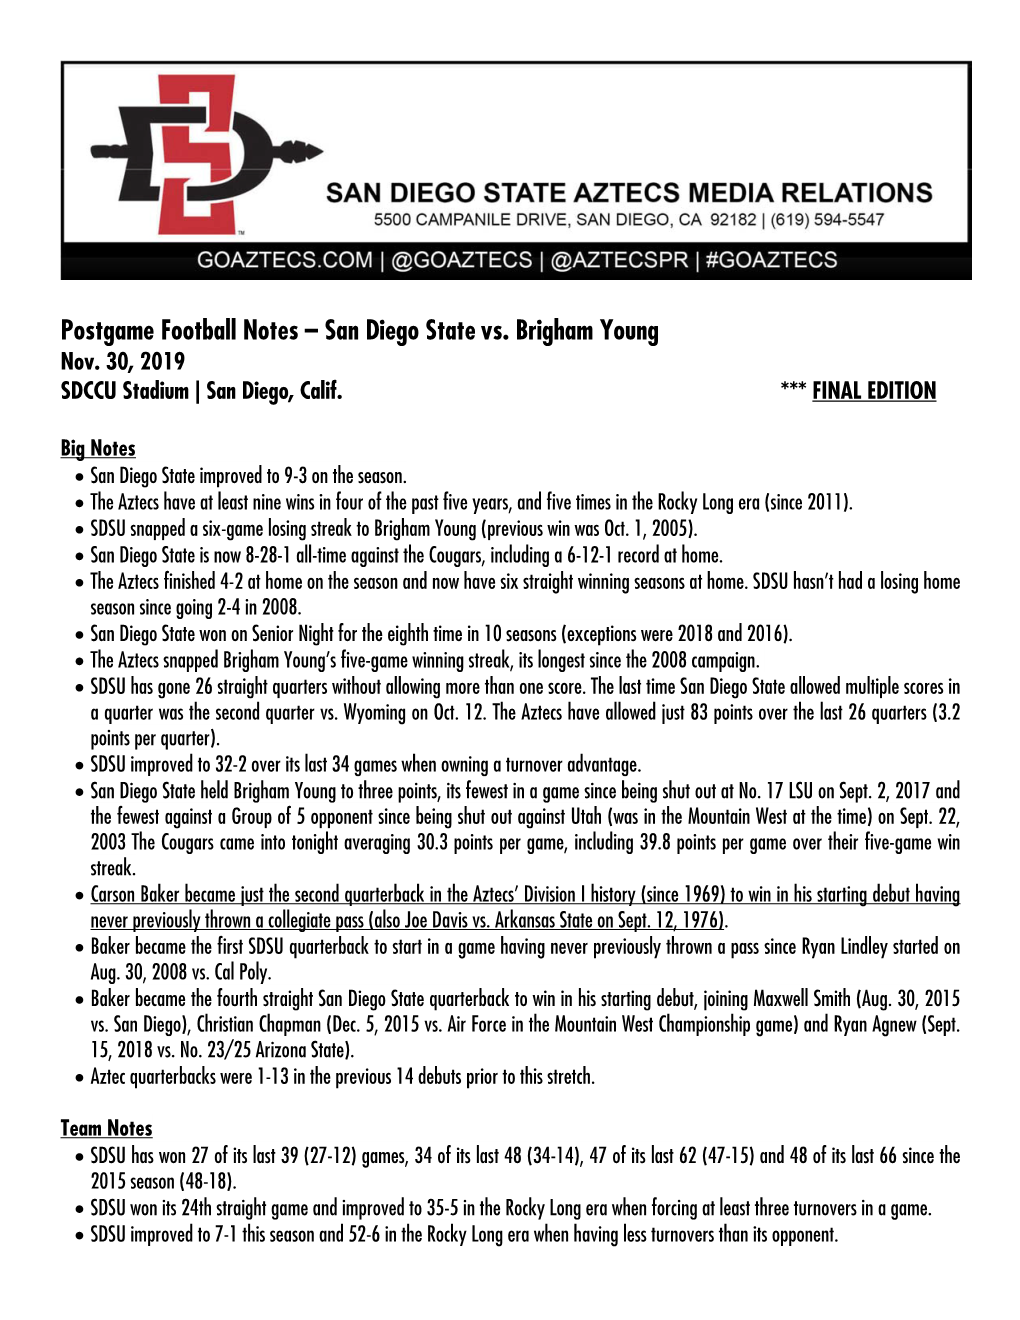 Postgame Football Notes – San Diego State Vs. Brigham Young Nov